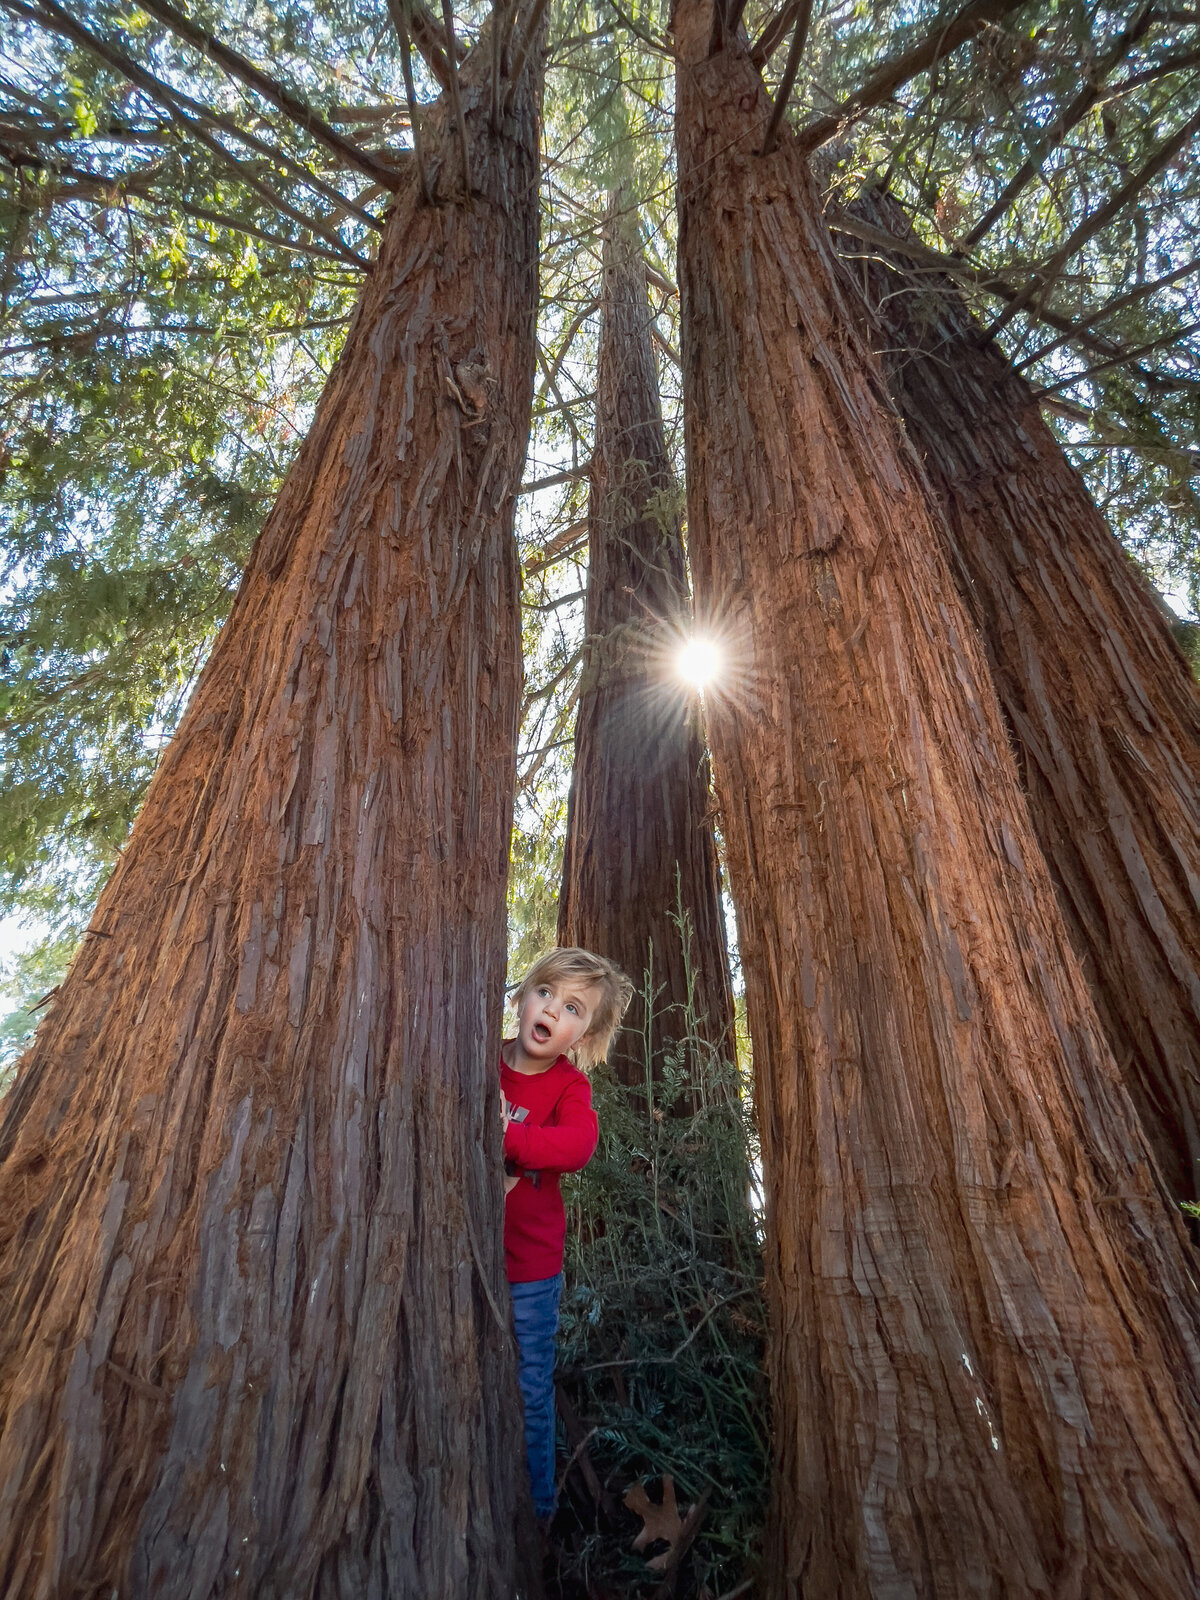 Child looks out from a redwood tree with sun shining